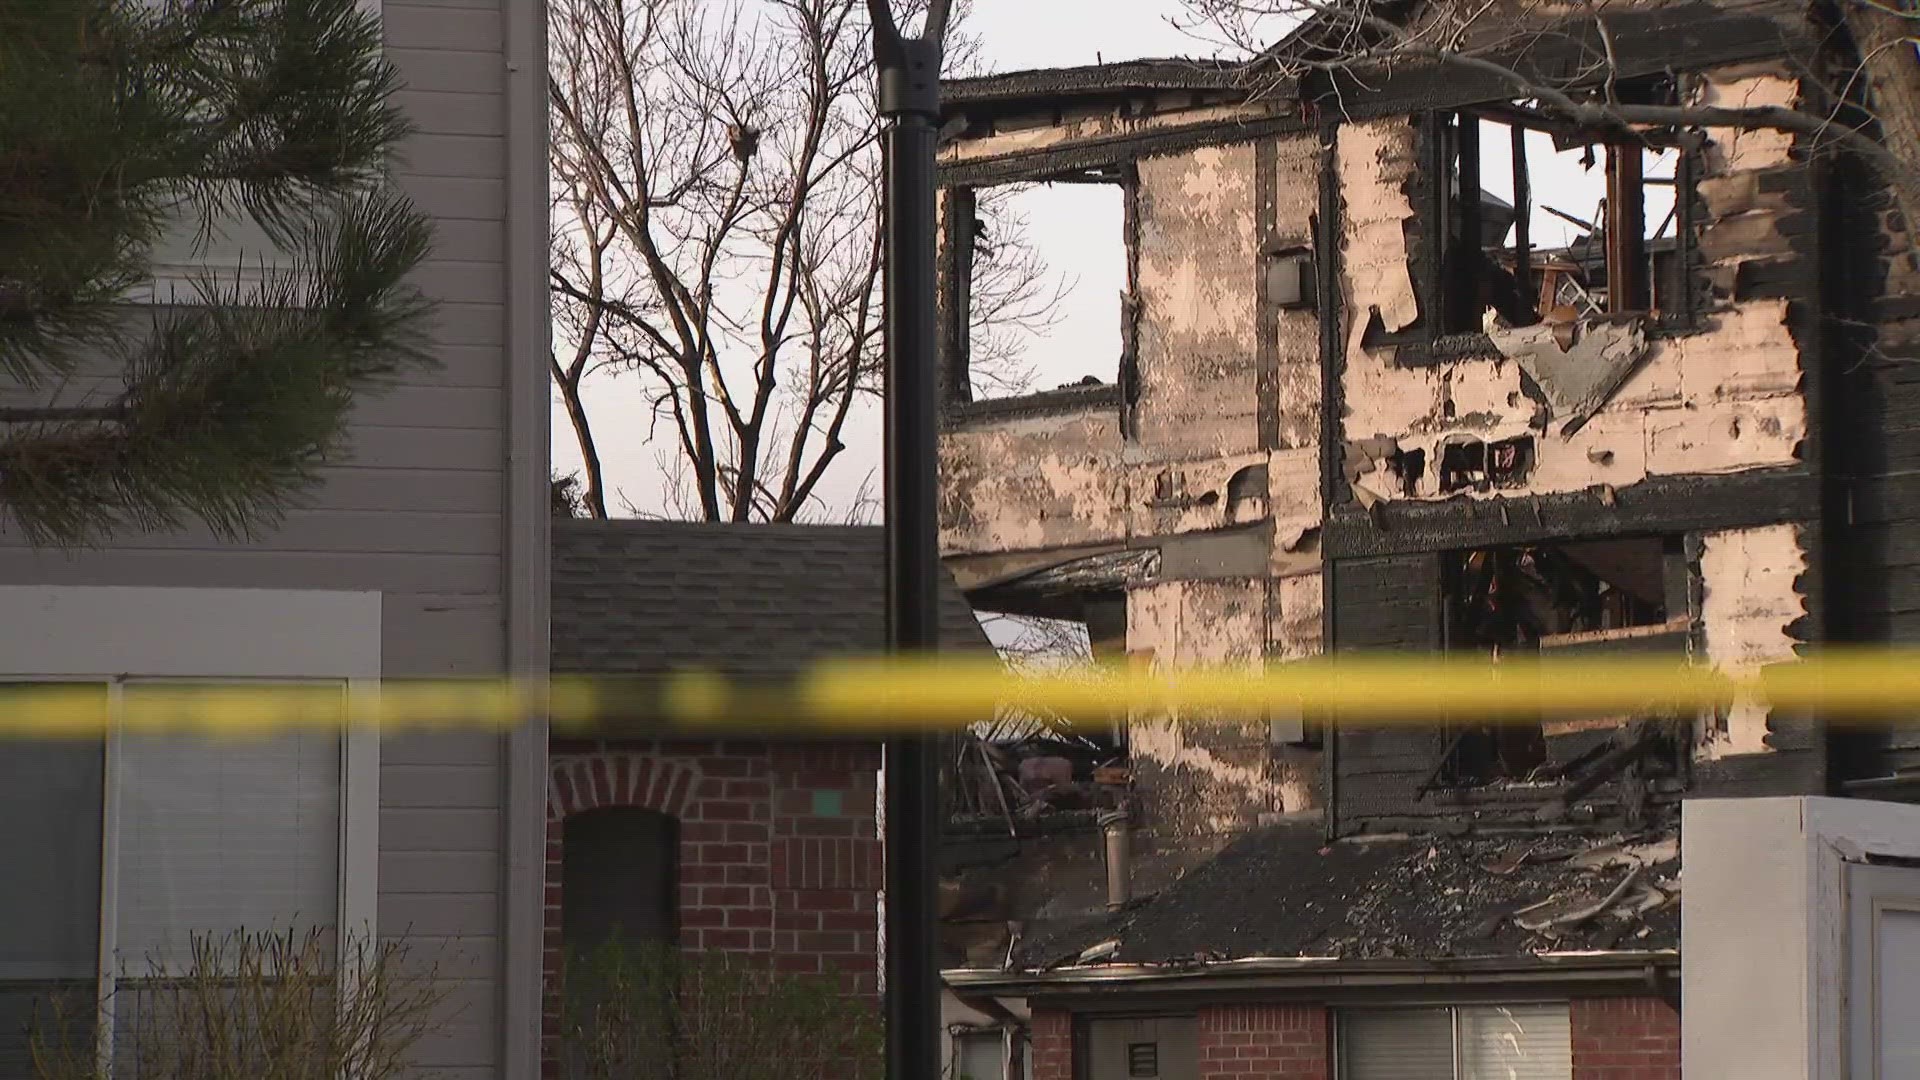 The Denver Fire Department said wind was a factor as they battled the blaze Saturday afternoon.